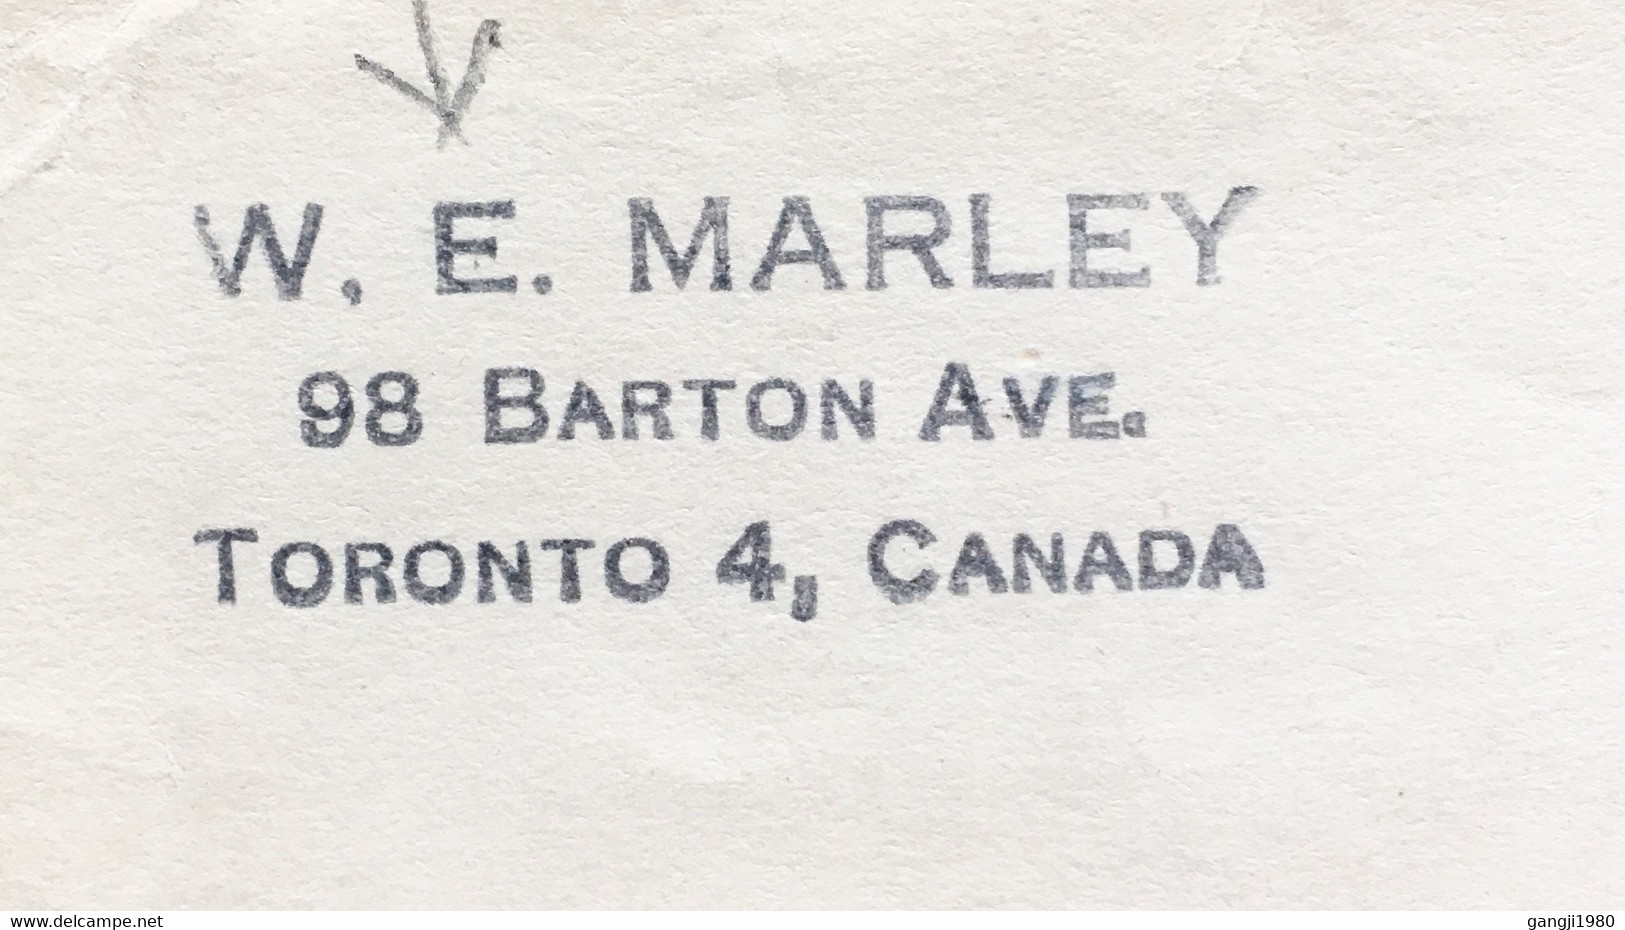 CANADA 1937, HOUSE OF ASSEMBLY CANCELLATION, POSTAL STATIONERY, KING GEORGE COVER, W. E. MARLEY TO MR. F. W. SEAMAN, USA - 1903-1954 Kings